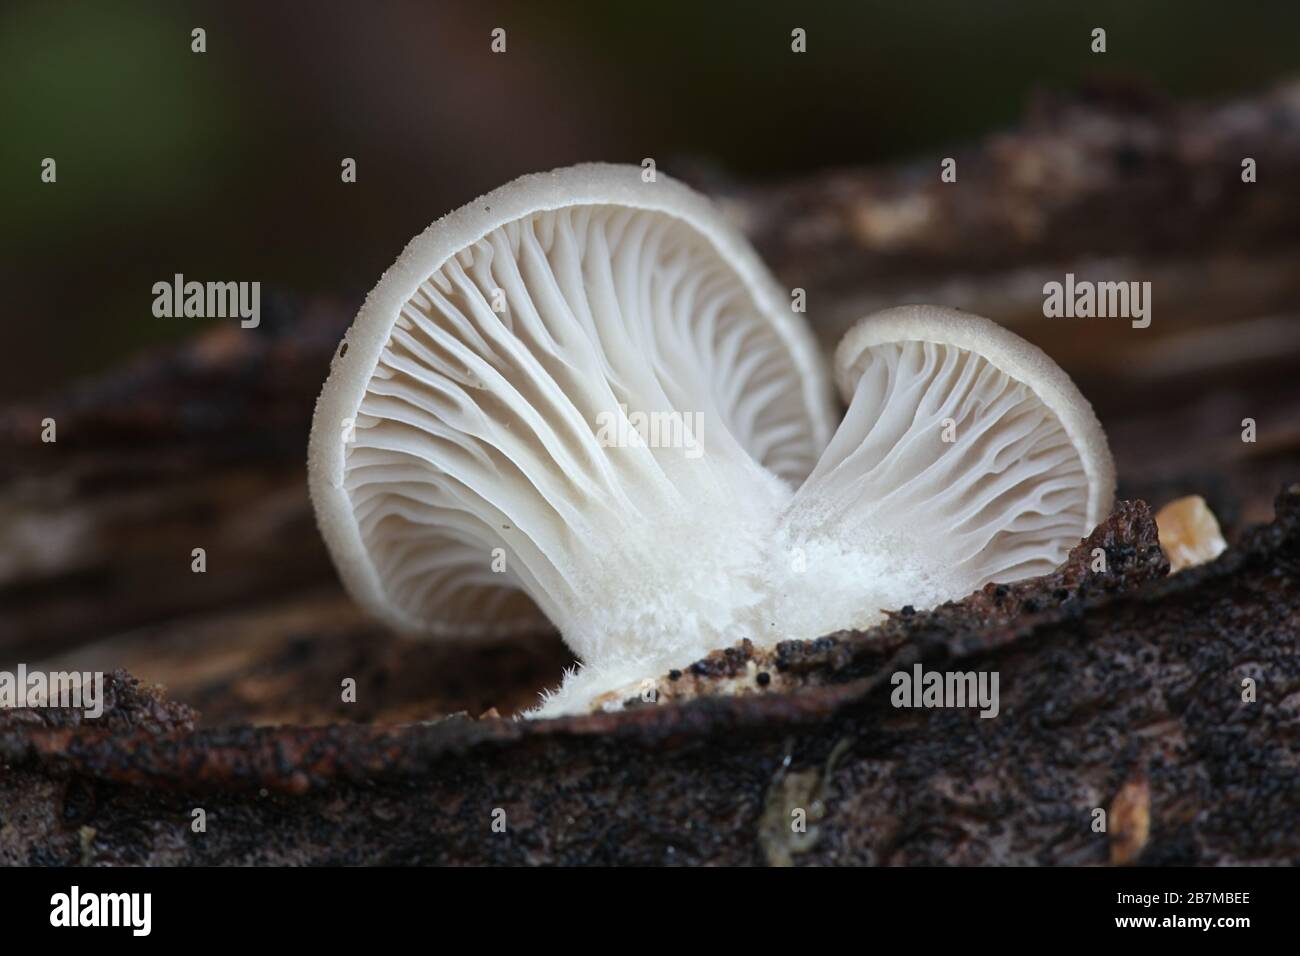 Pleurotus ostreatus, known as the pearl oyster mushroom or winter oyster, wild edible fungus from Finland Stock Photo